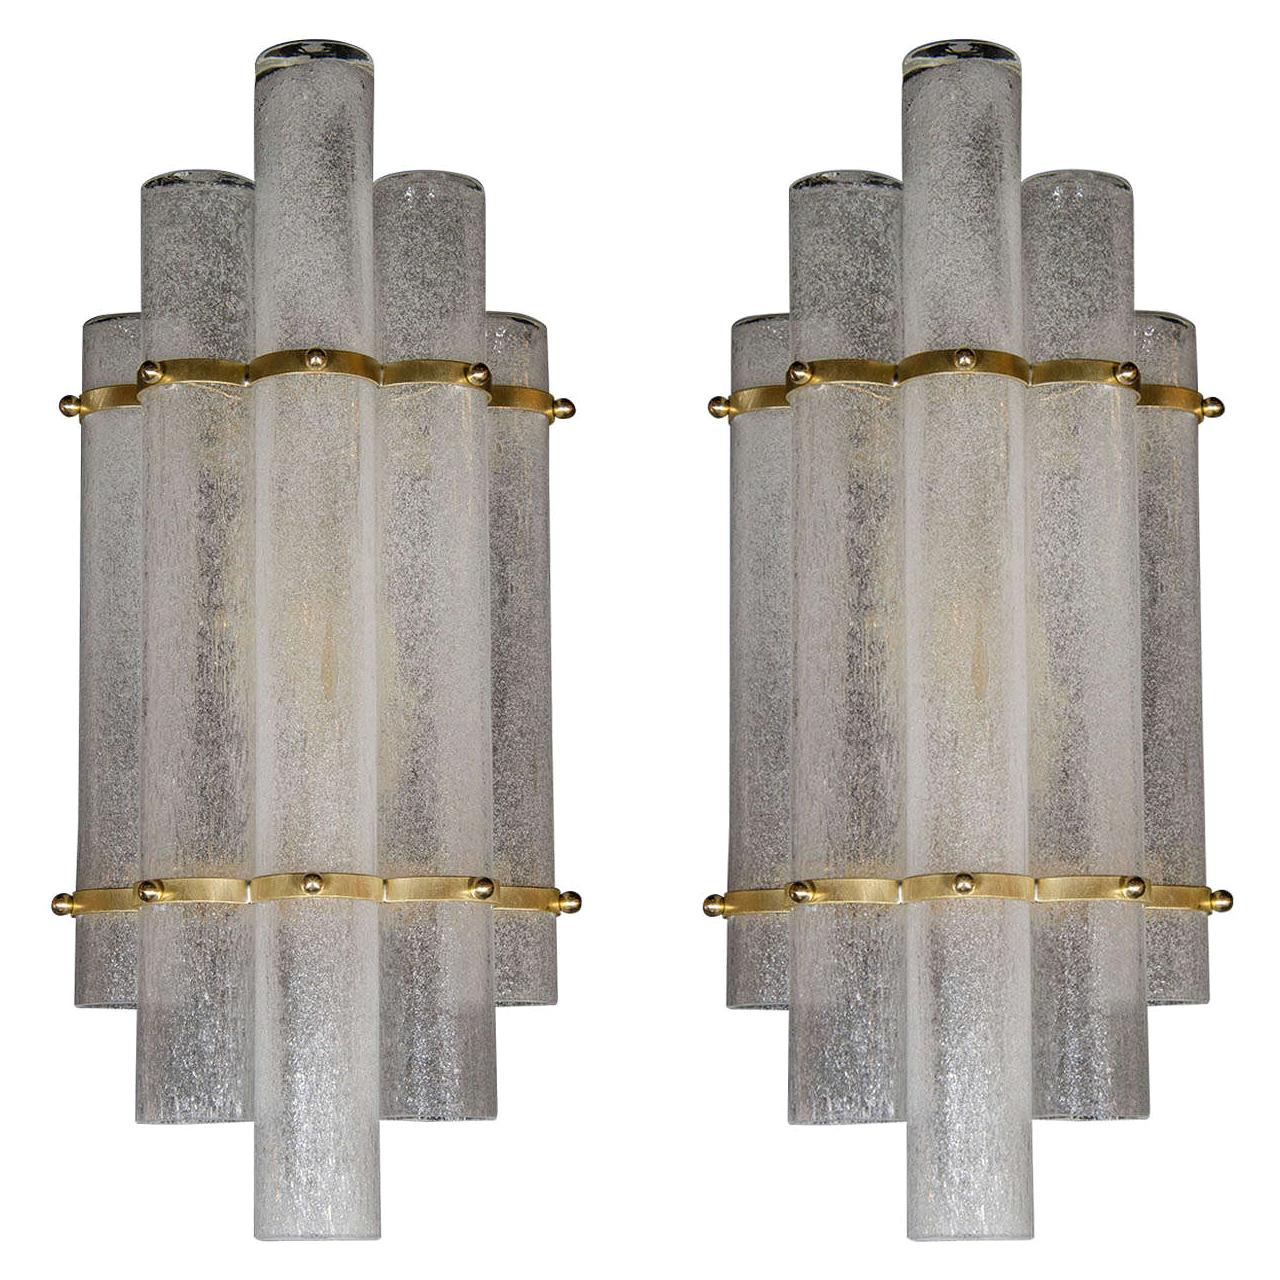 Pair of Modernist Hand Blown Murano Glass "Pulegoso" Sconces with Brass Fittings